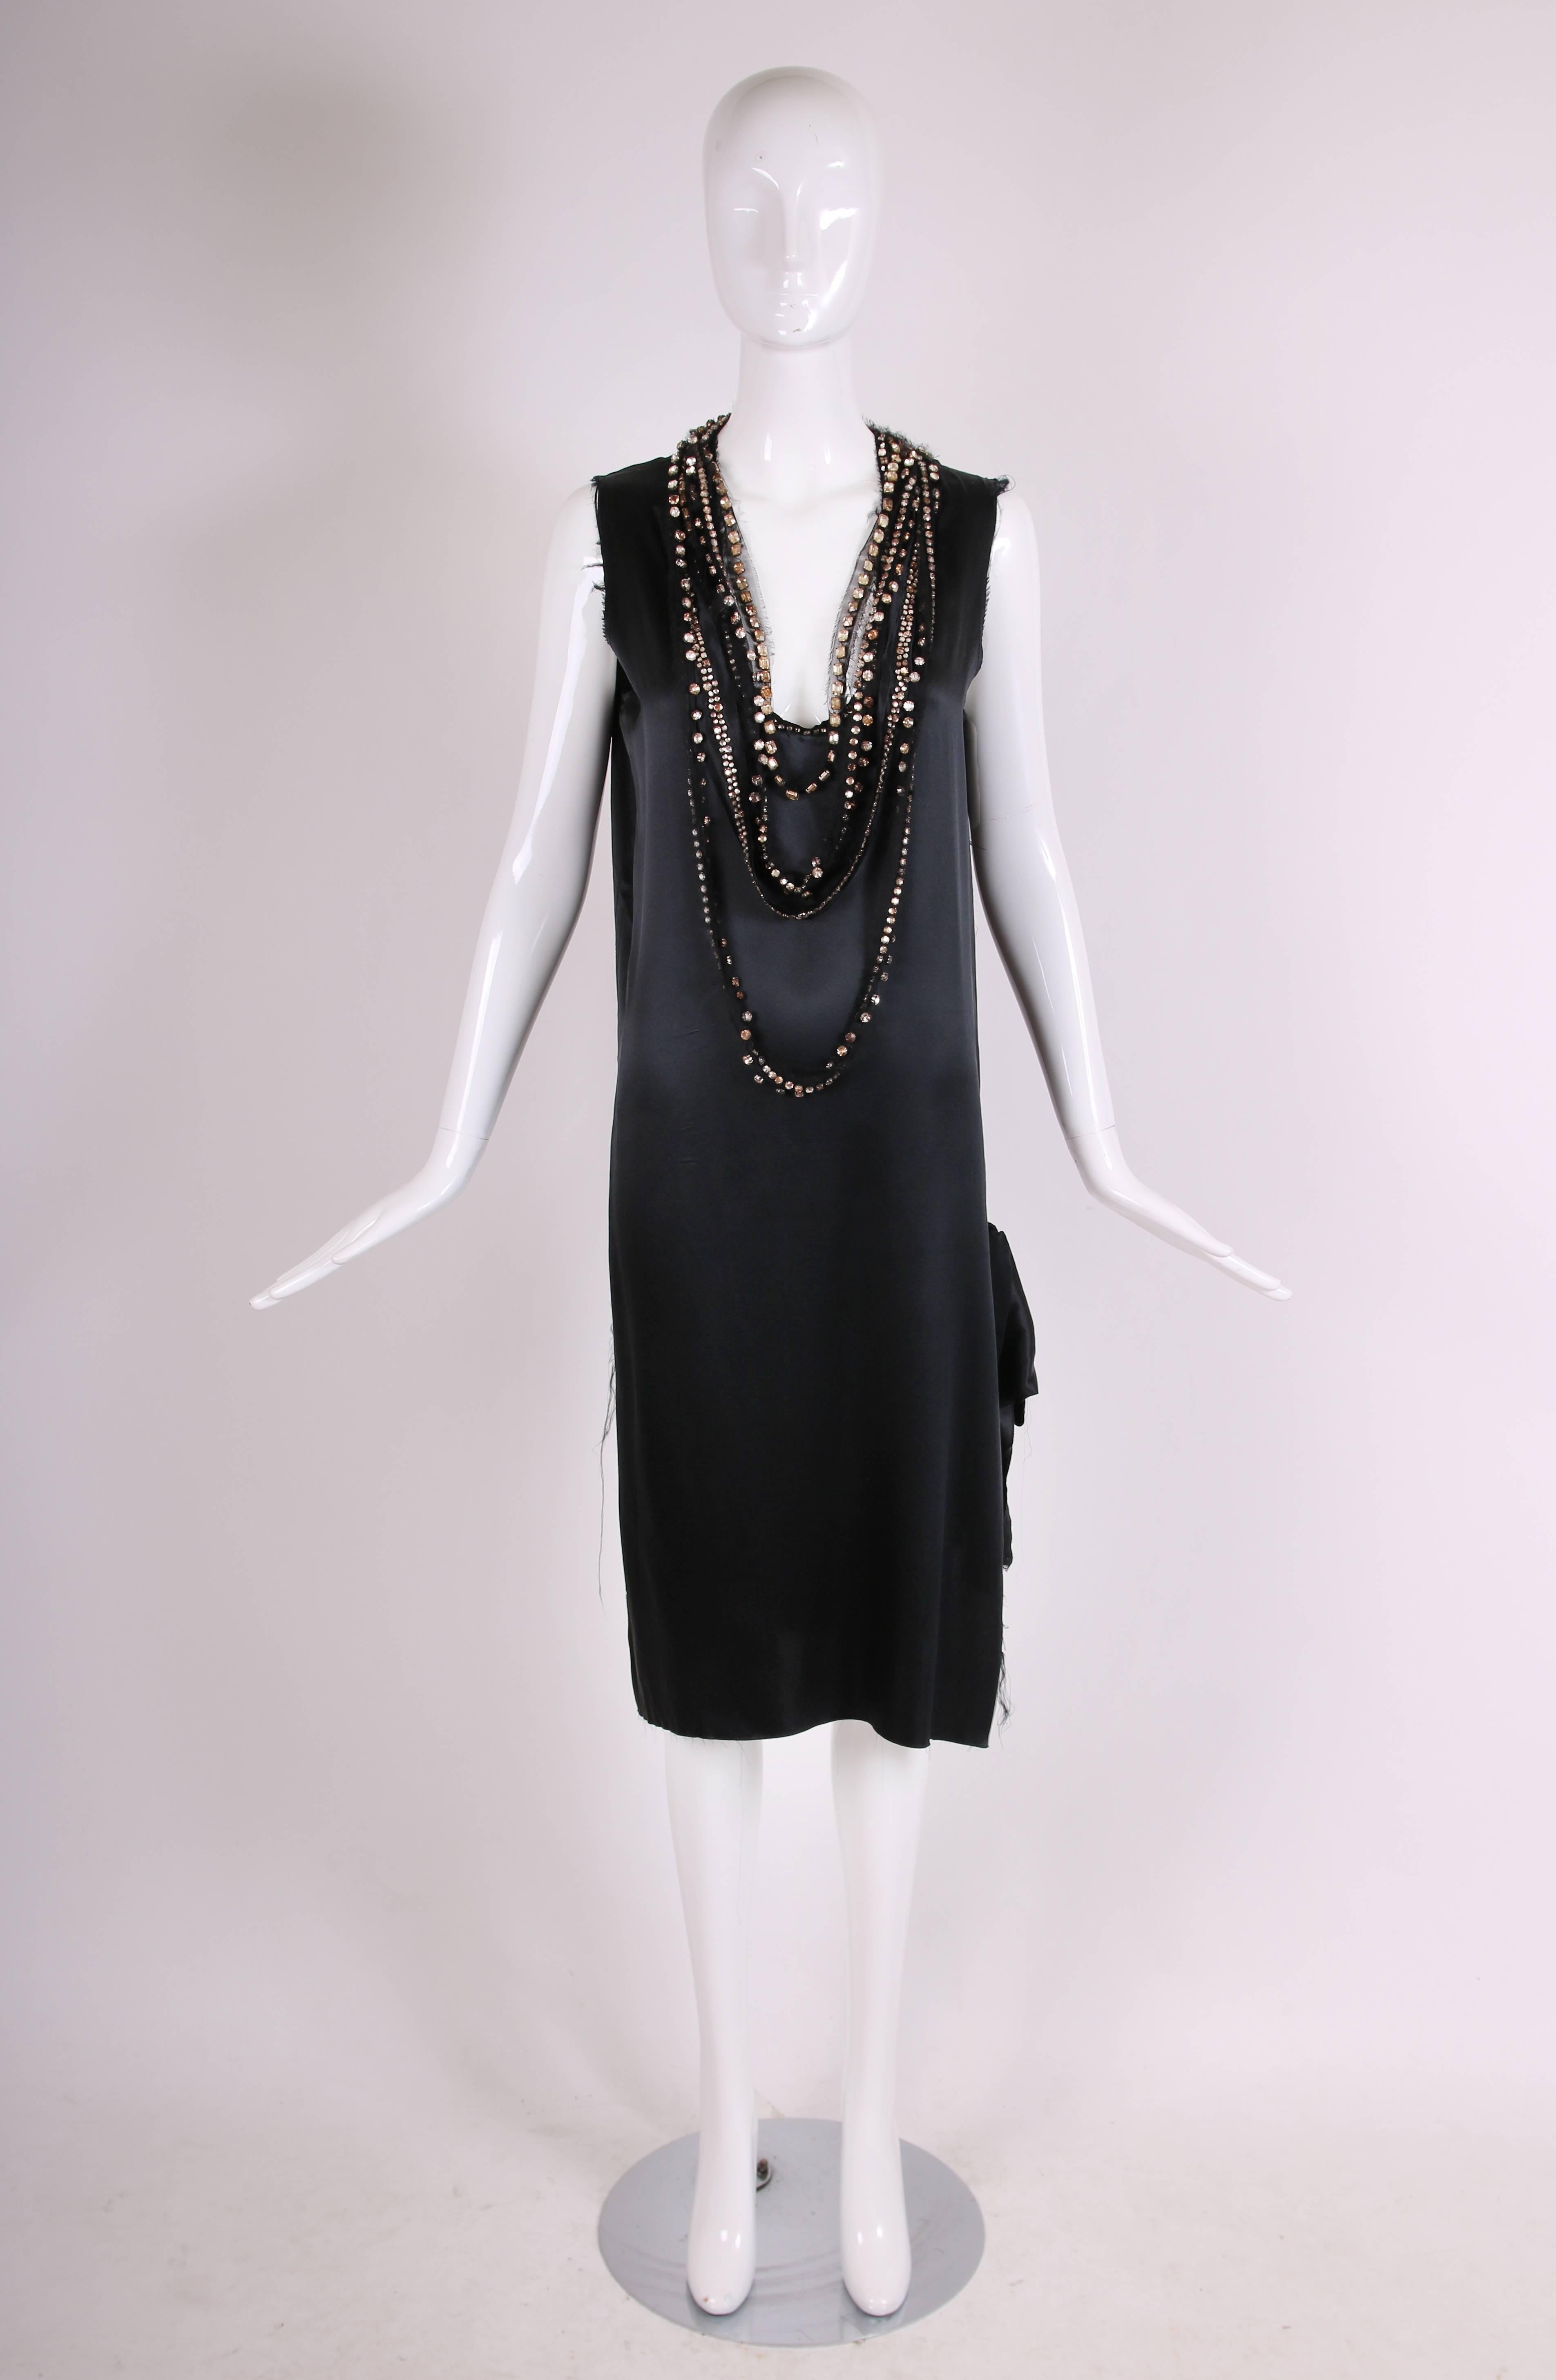 Lanvin by Alber Elbaz black silk evening dress with side ties and multiple strands of rhinestone encrusted tulle strands mixed together and attached at the neck. Purposefully unfinished seams. Size tag 40. In excellent